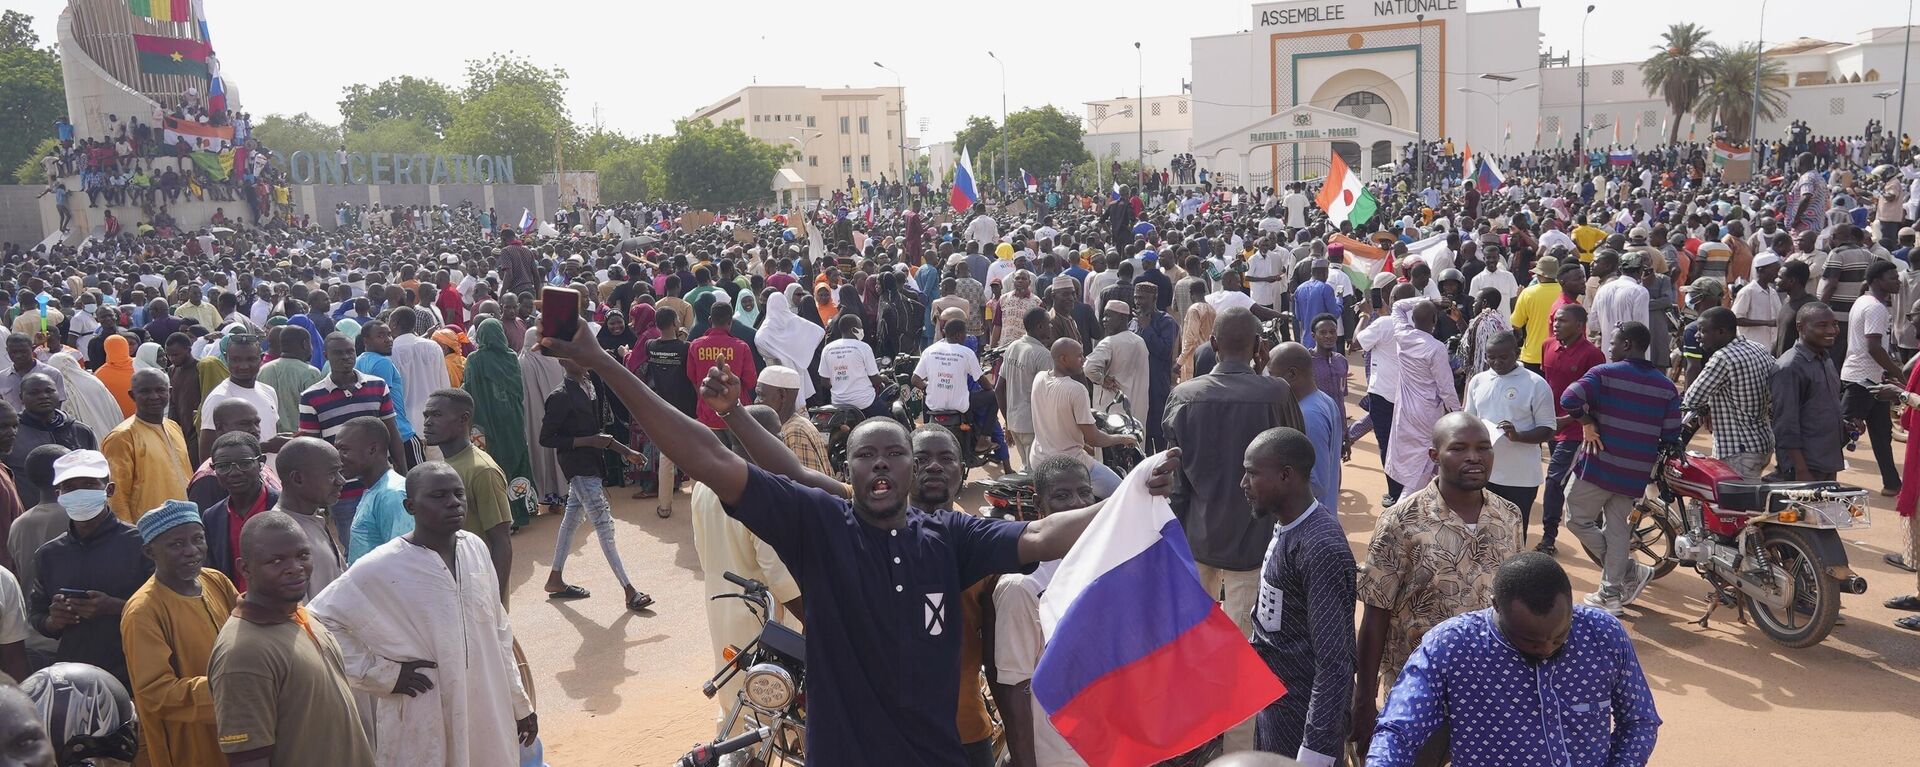 Nigeriens, some holding Russian flags, participate in a march called by supporters of coup leader Gen. Abdourahmane Tchiani in Niamey, Nige - Sputnik Africa, 1920, 28.09.2023